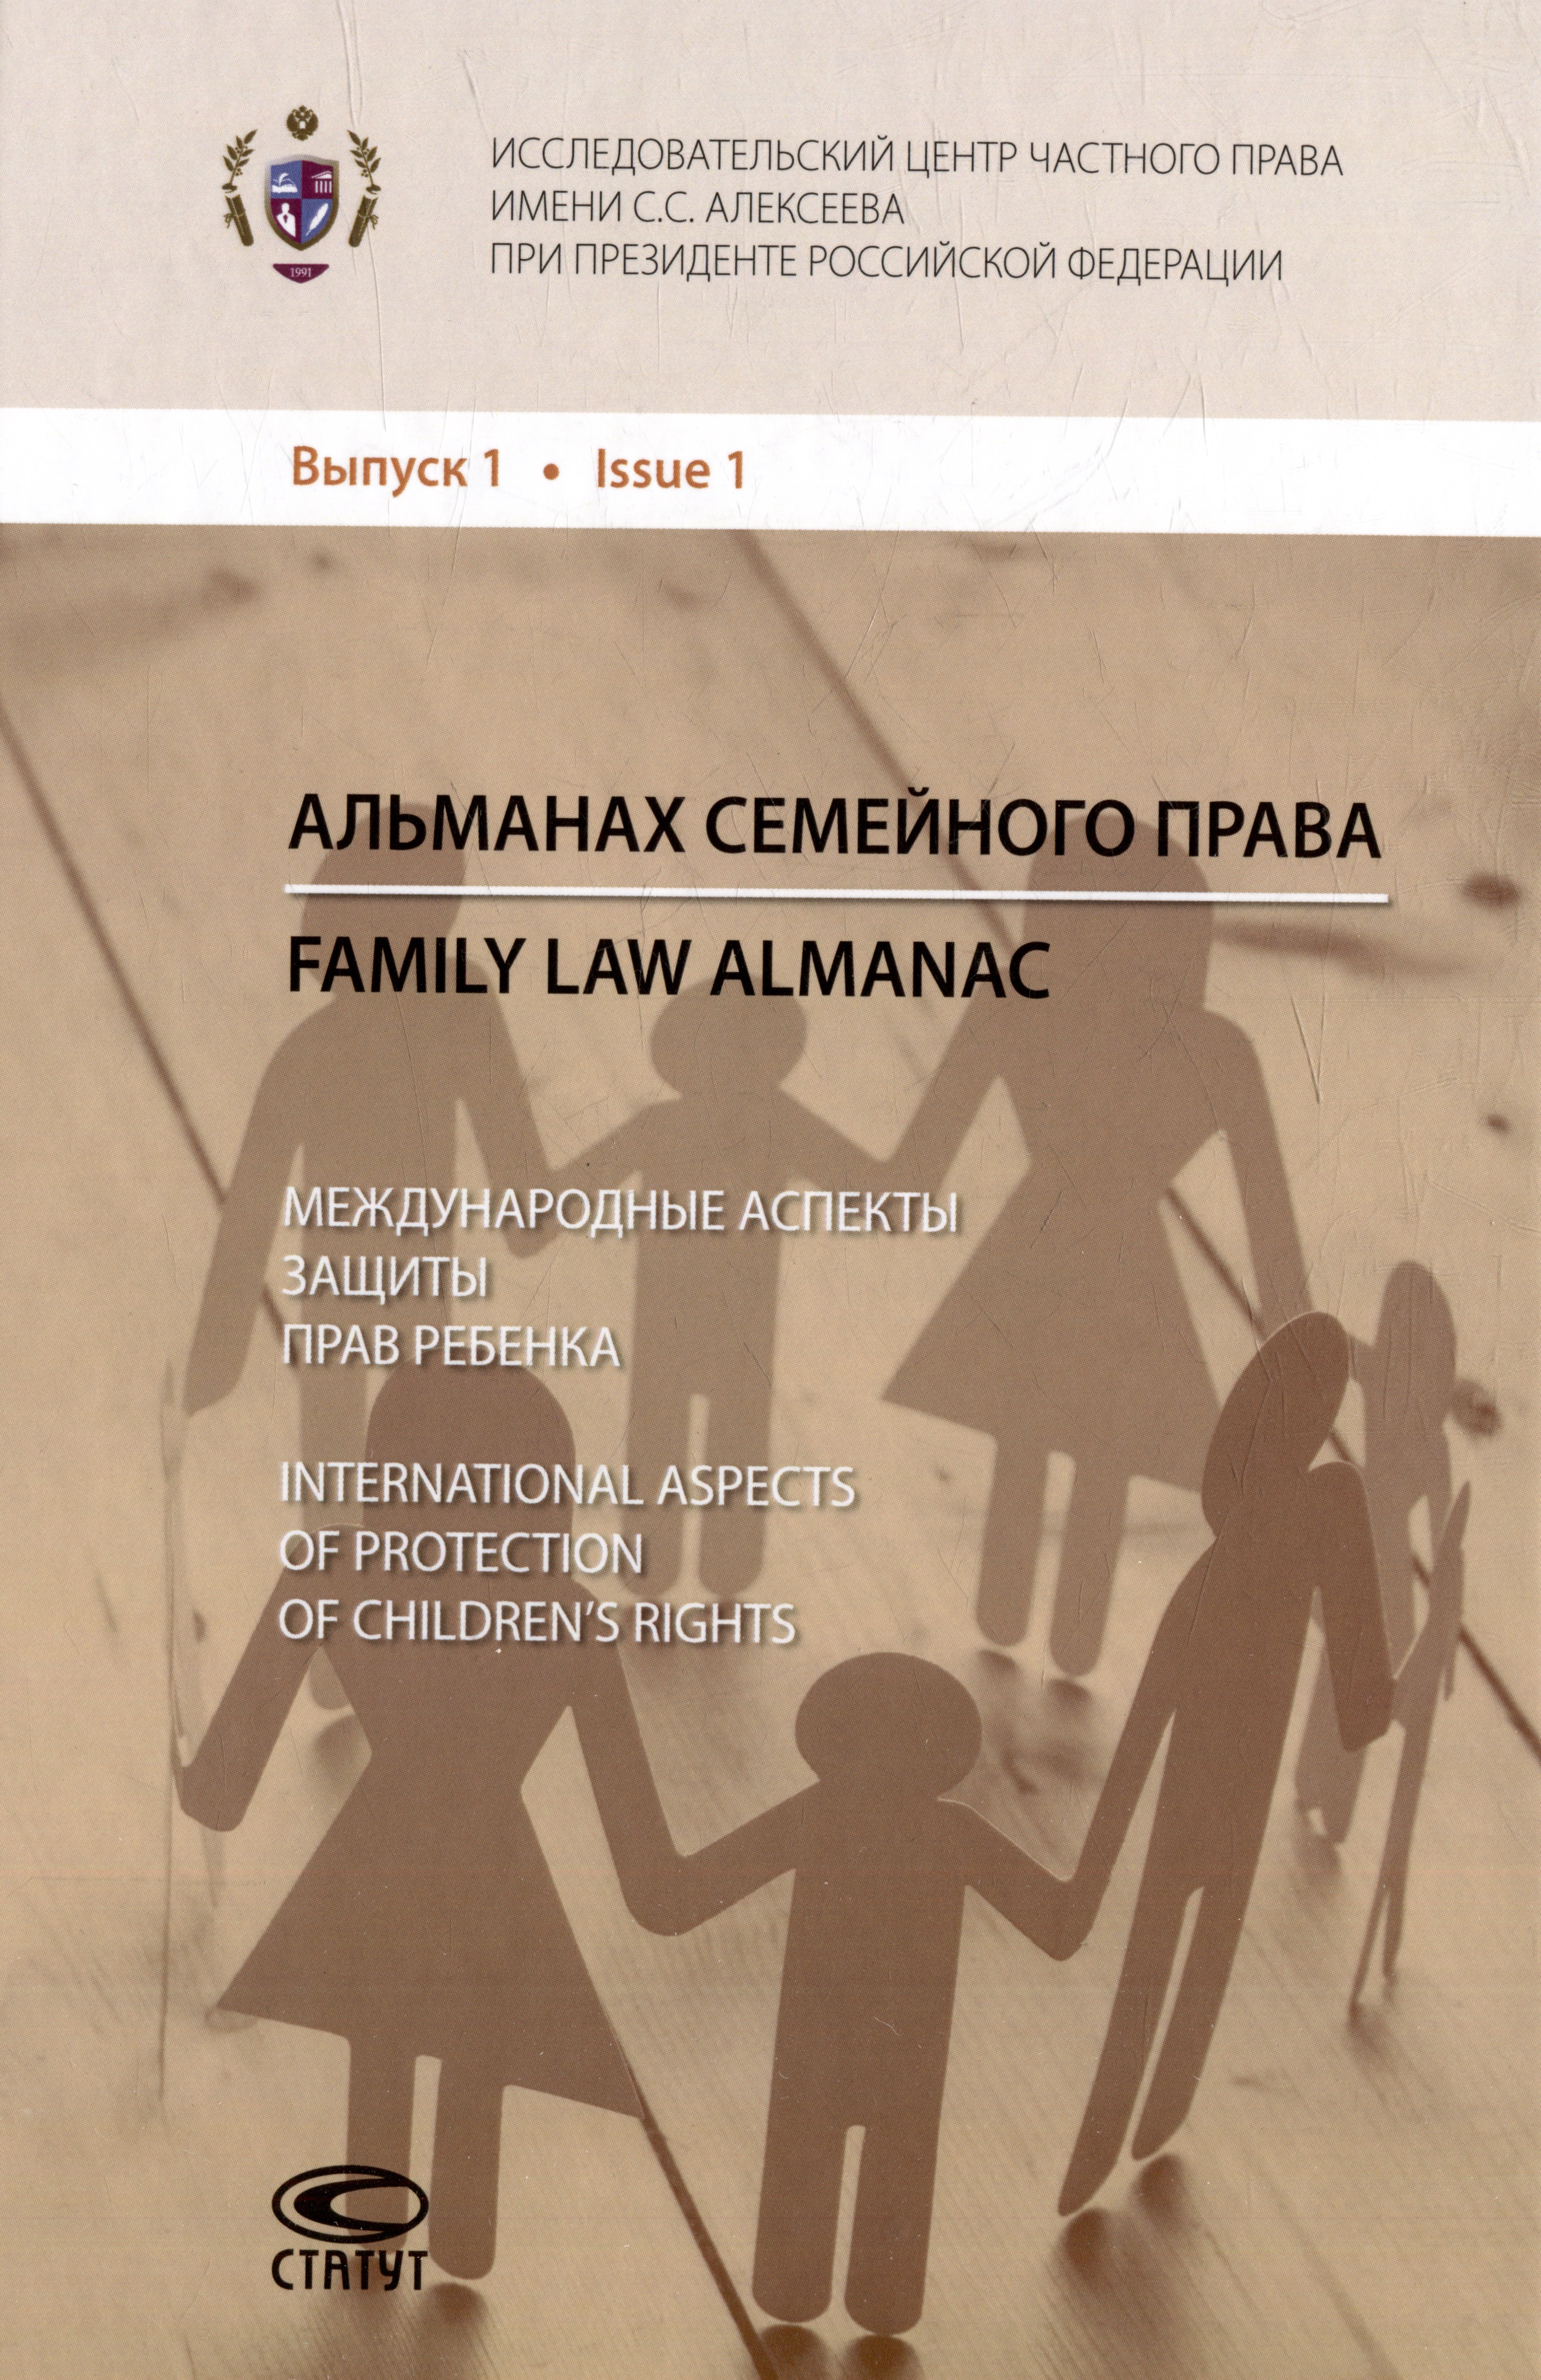   . . 1:      / Family law almanac. Issue 1: International aspects of protection of childrens rights